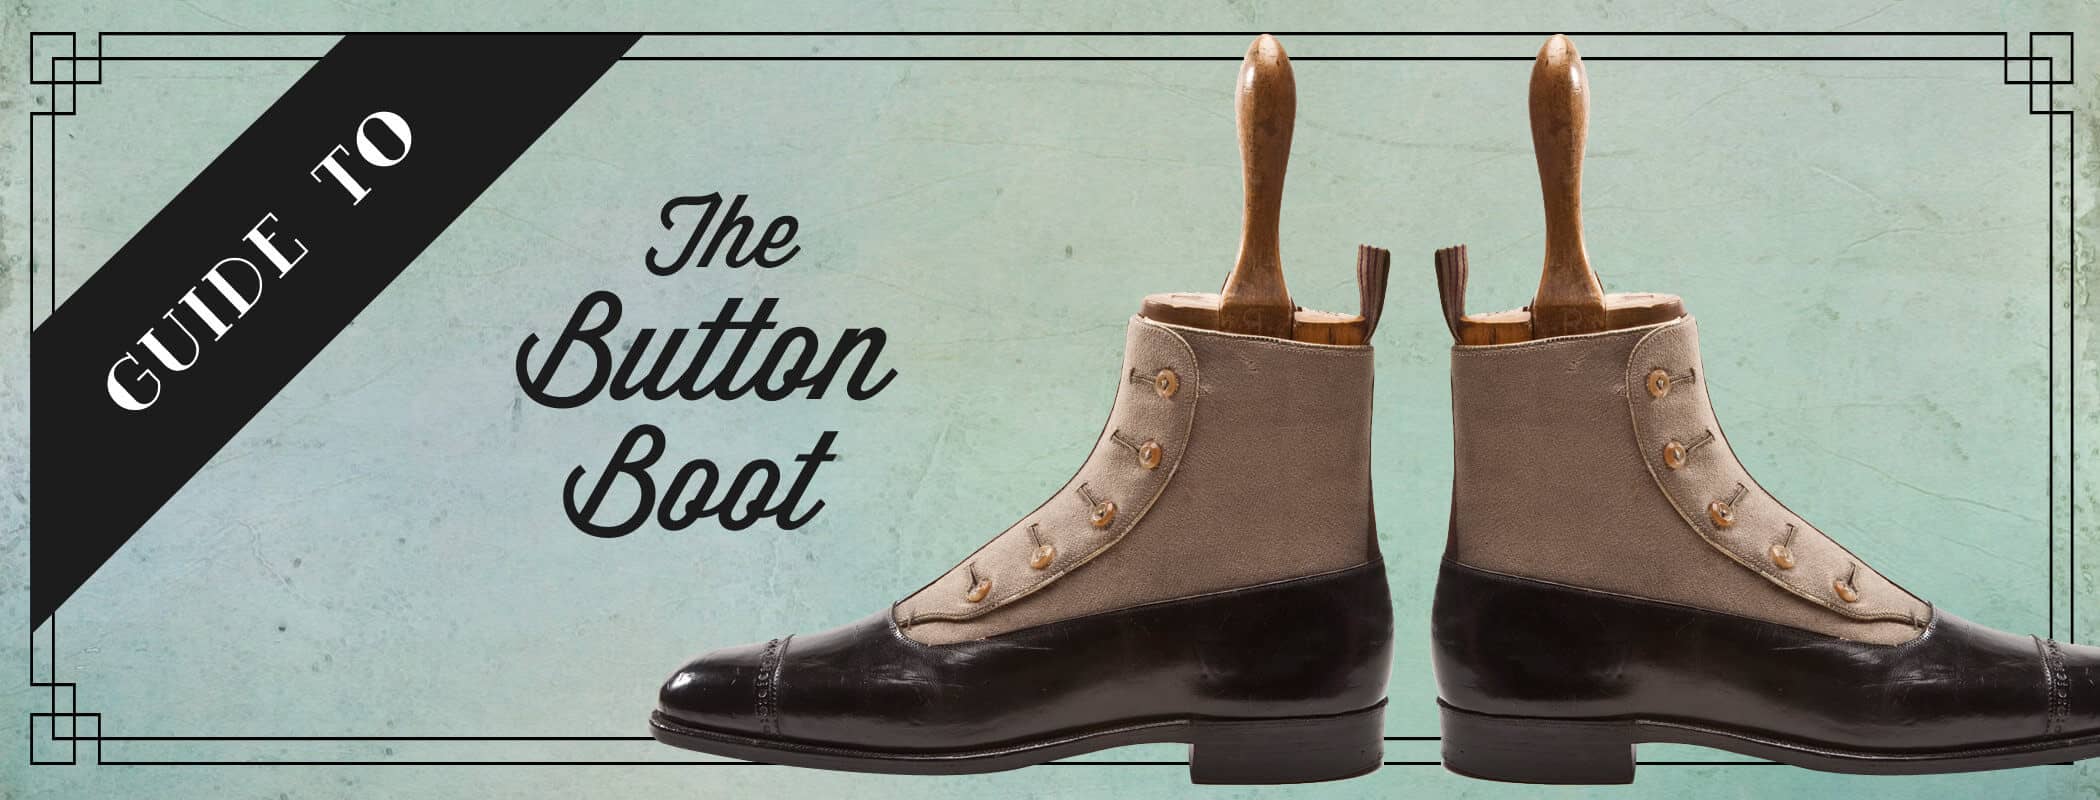 The Button Boots Guide